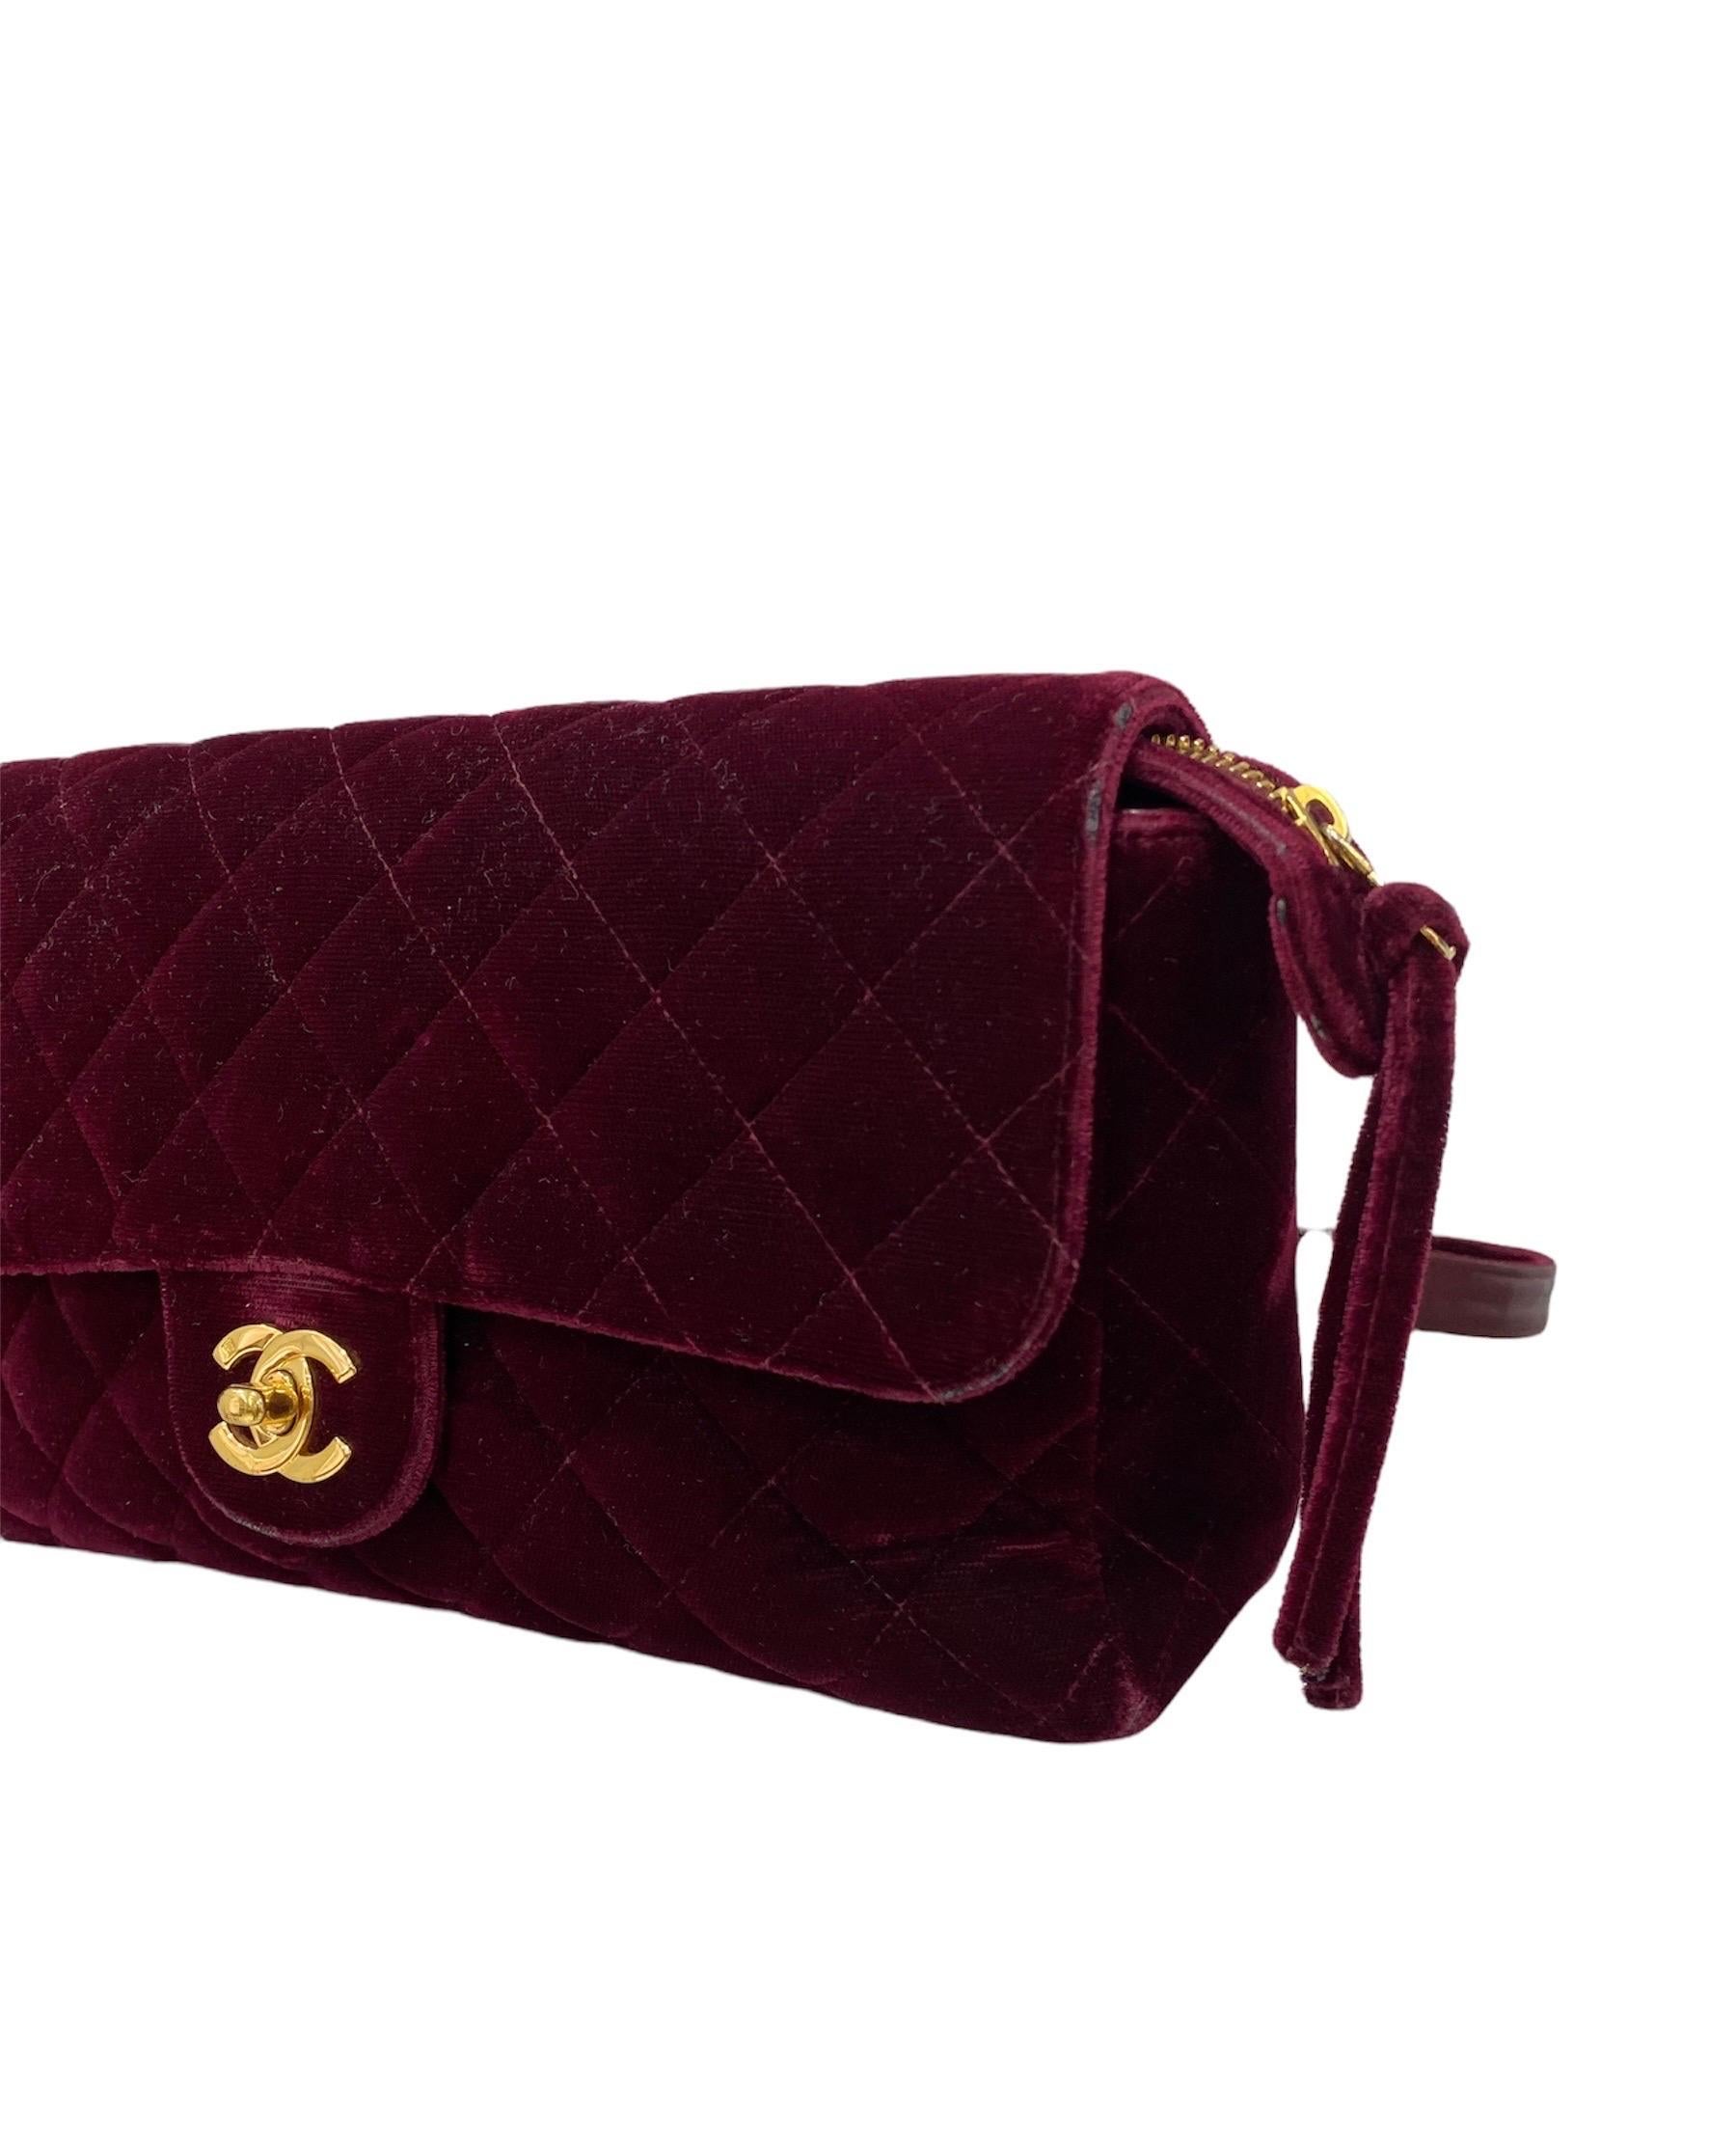 Chanel backpack, Vintage model, year of production 94/96, made of burgundy velvet with golden hardware.
Equipped with a flap with CC interlocking logo closure, internally lined in burgundy leather, quite roomy.
Equipped with double shoulder strap in